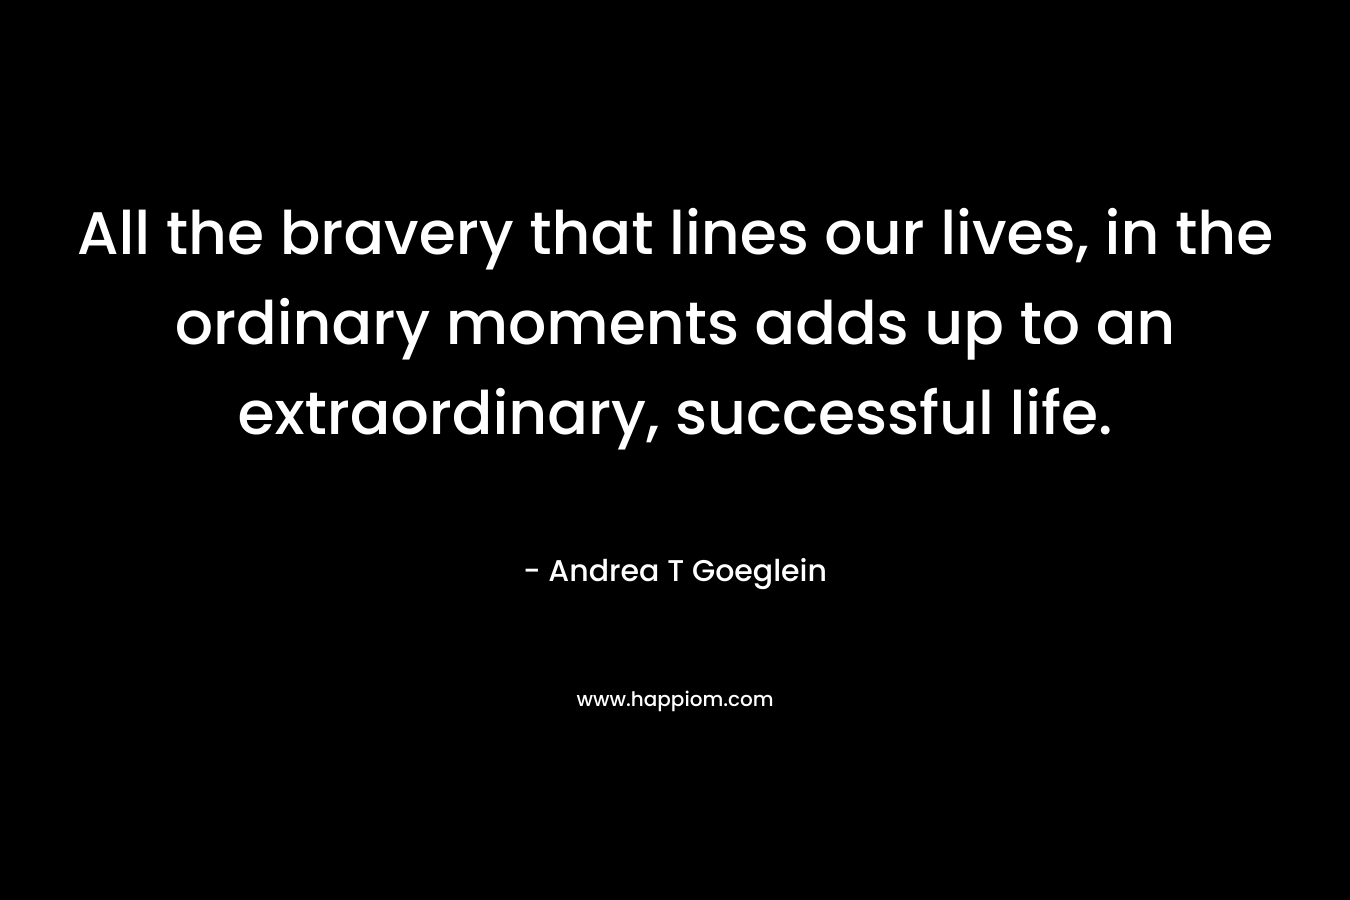 All the bravery that lines our lives, in the ordinary moments adds up to an extraordinary, successful life.